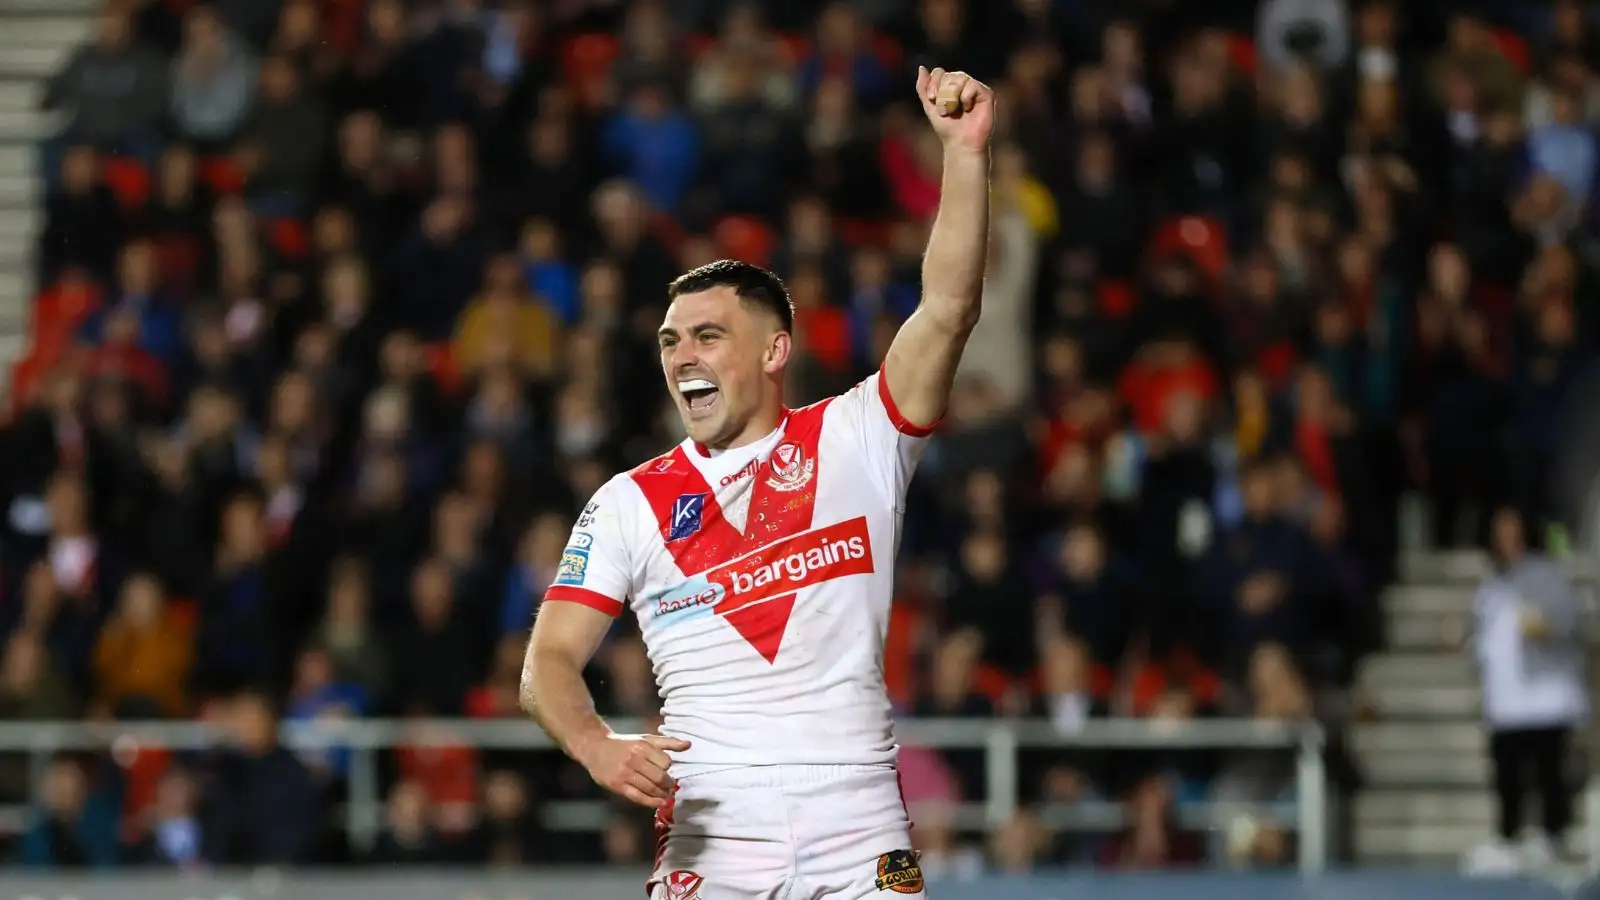 COMPETITION: Win Super League play-off tickets including St Helens, Warrington, Hull KR and Leigh